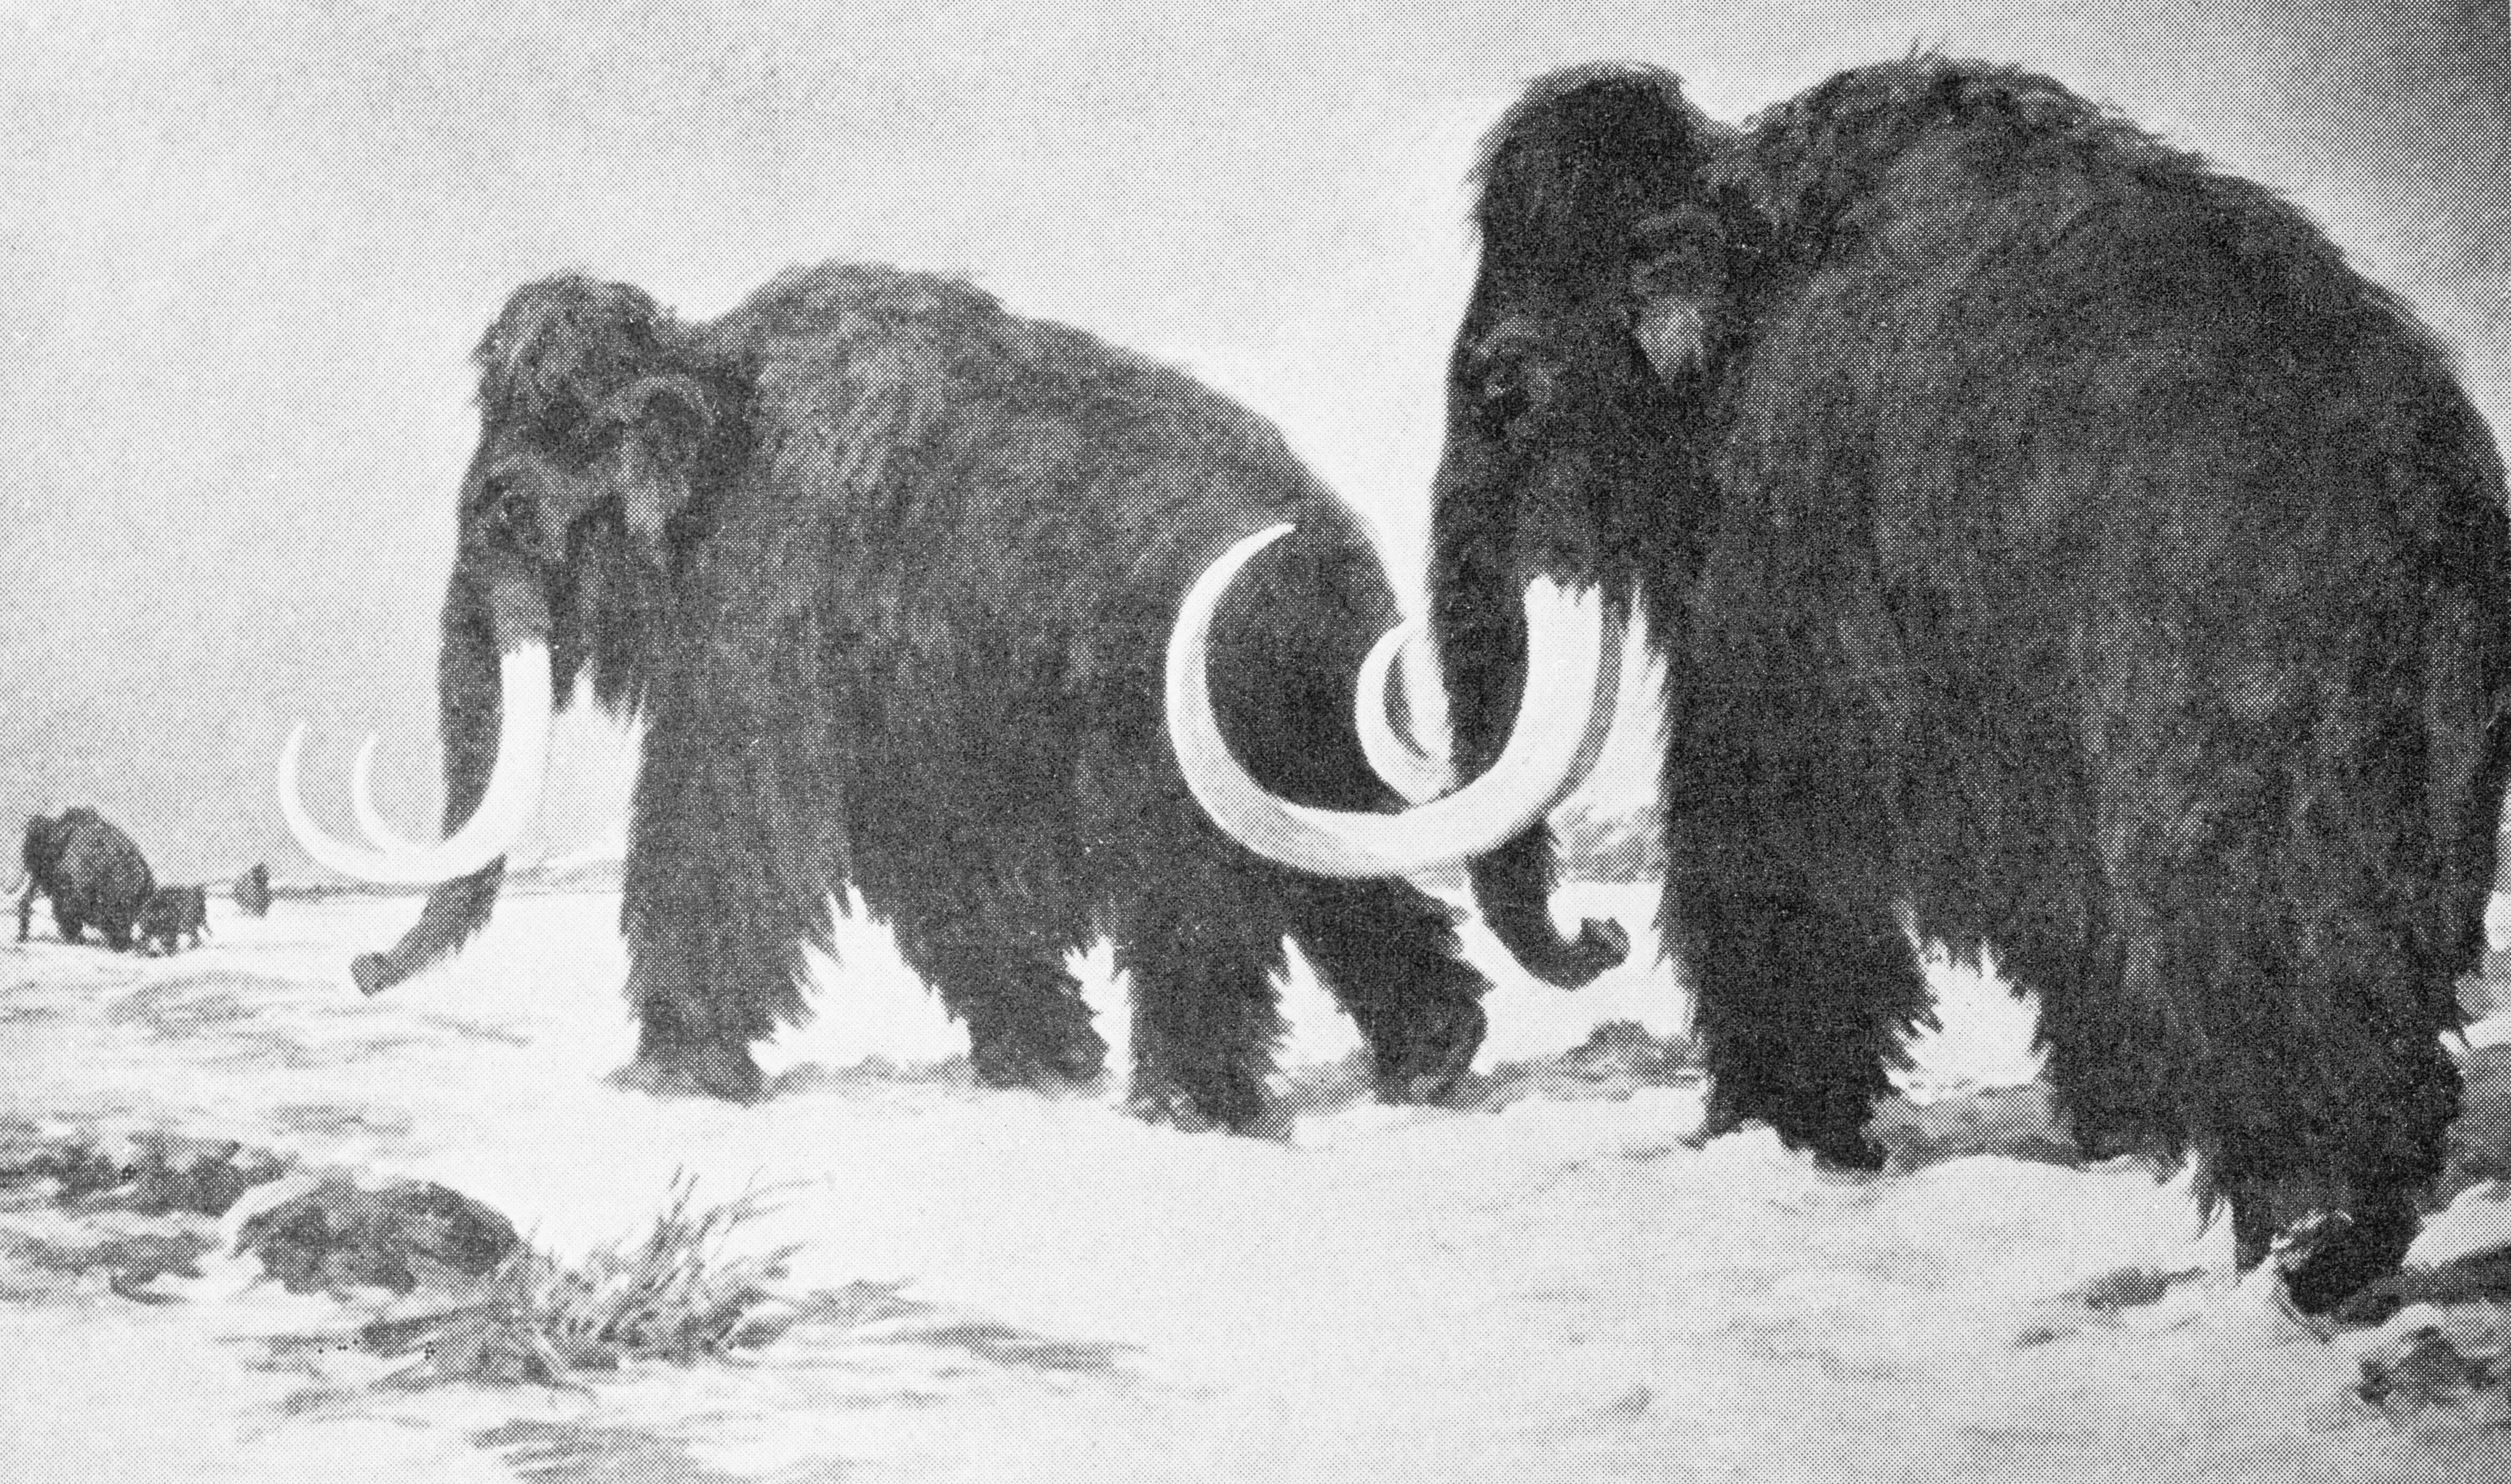 Illustration of Woolly mammoths Trudging in Snow, a giclee print by Corbis